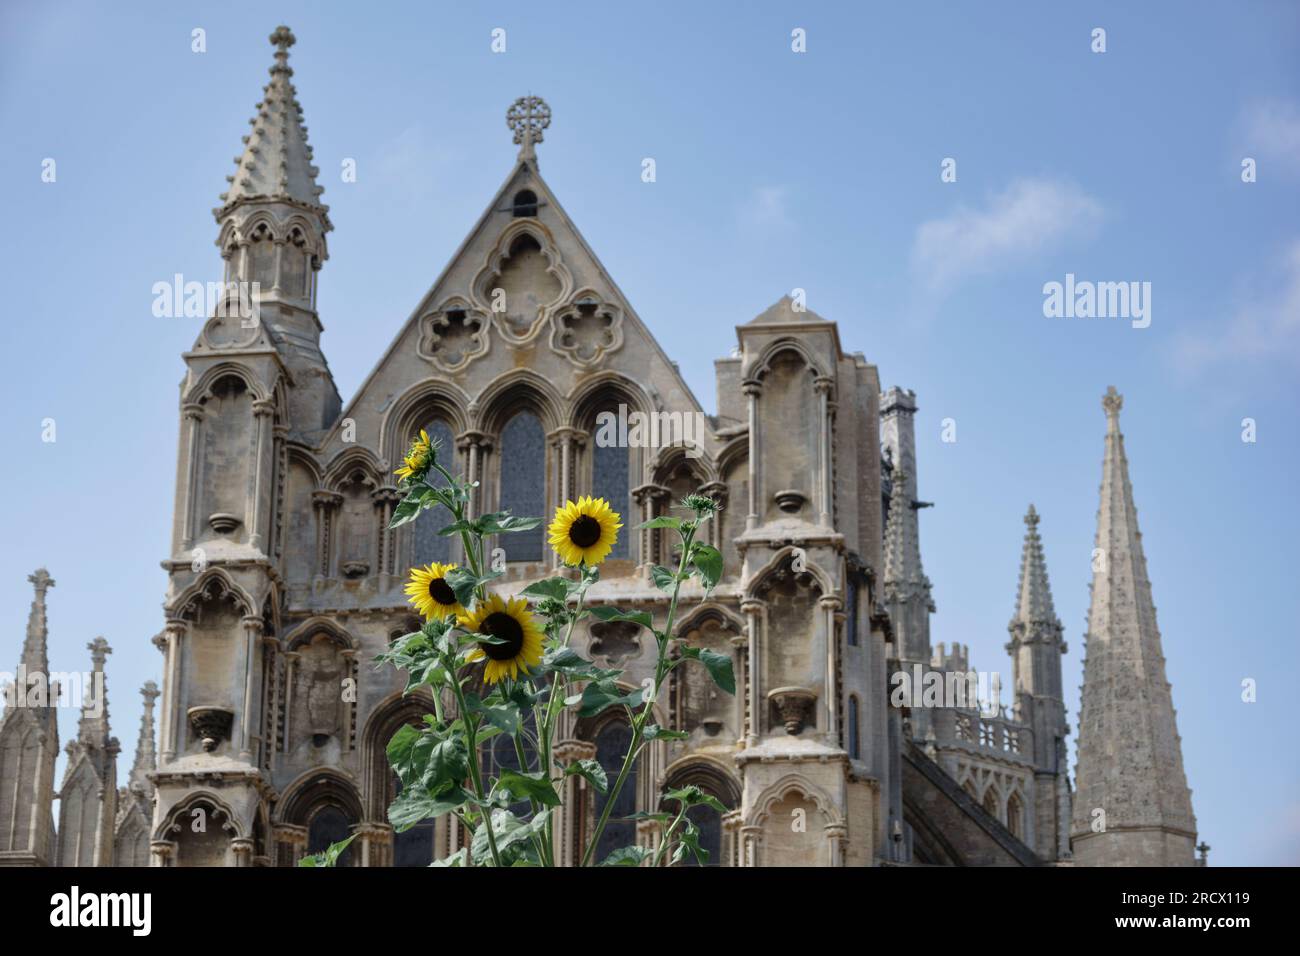 Ely Cathedral with sunflowers in the foreground Stock Photo